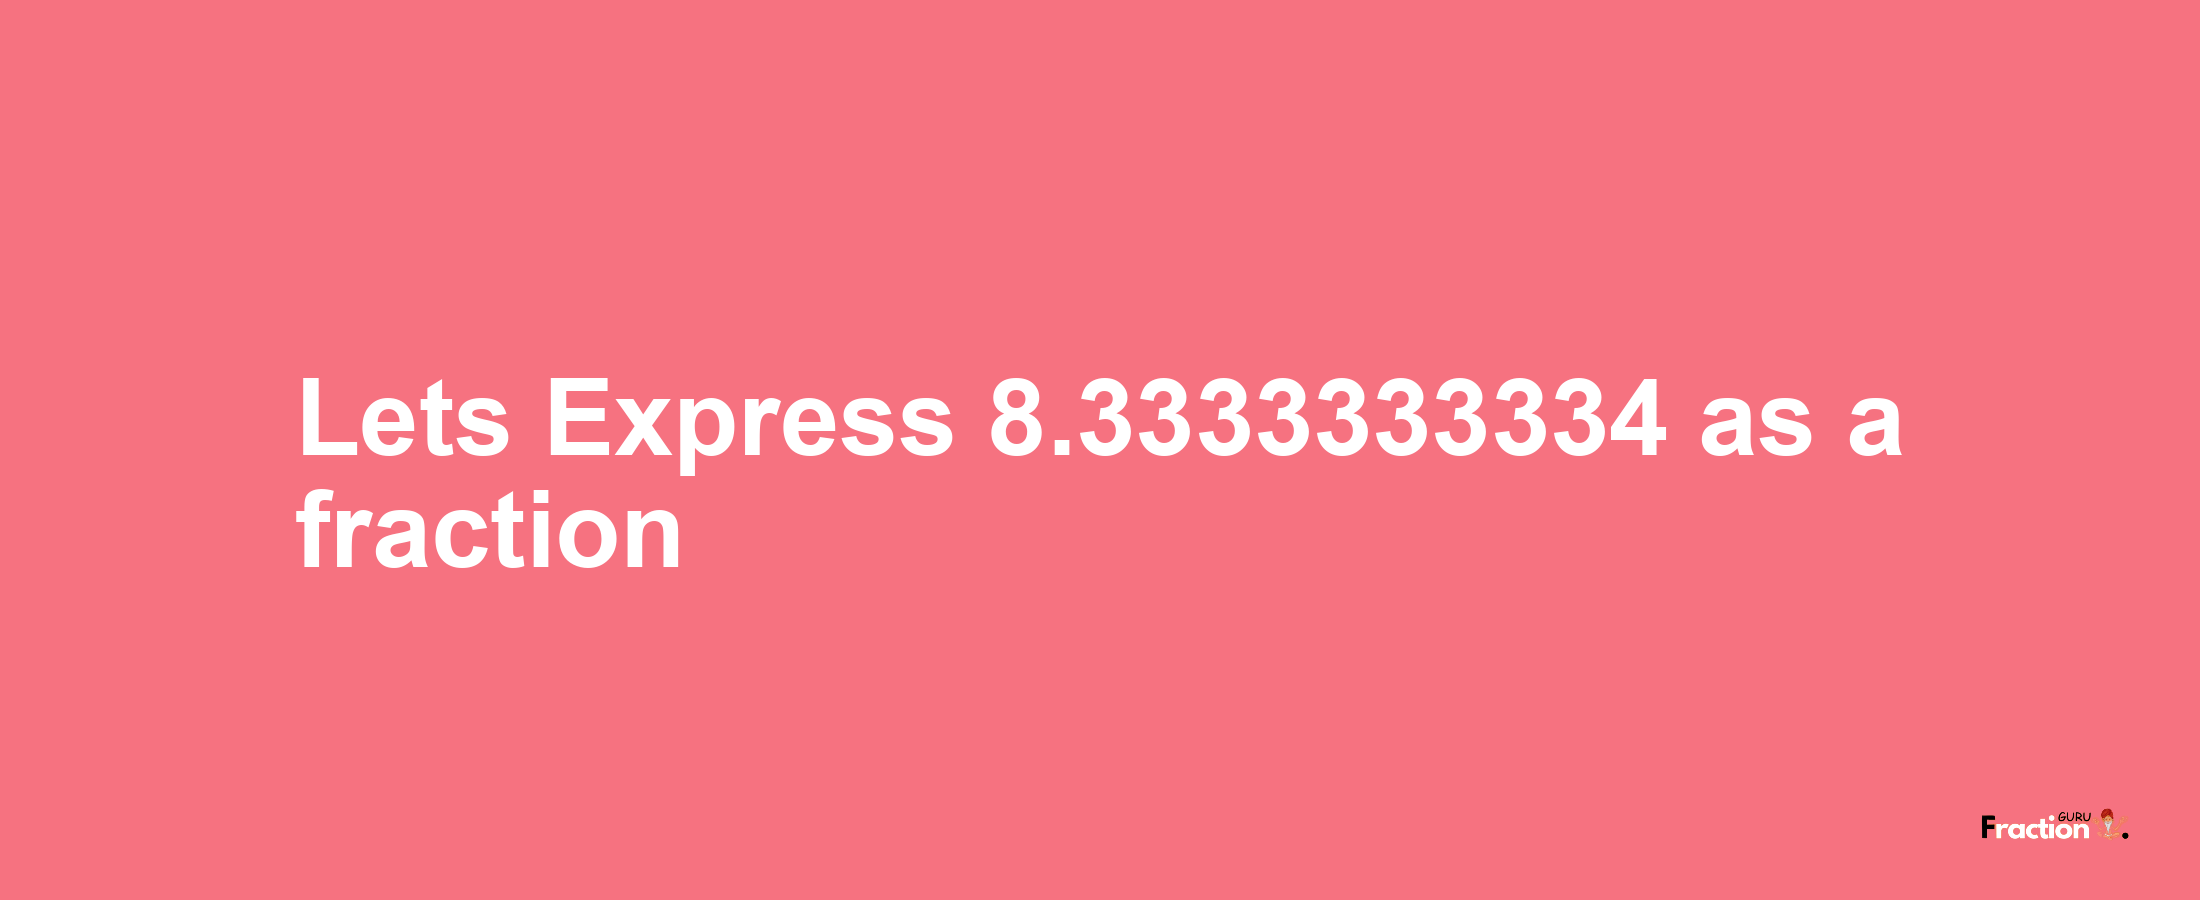 Lets Express 8.3333333334 as afraction